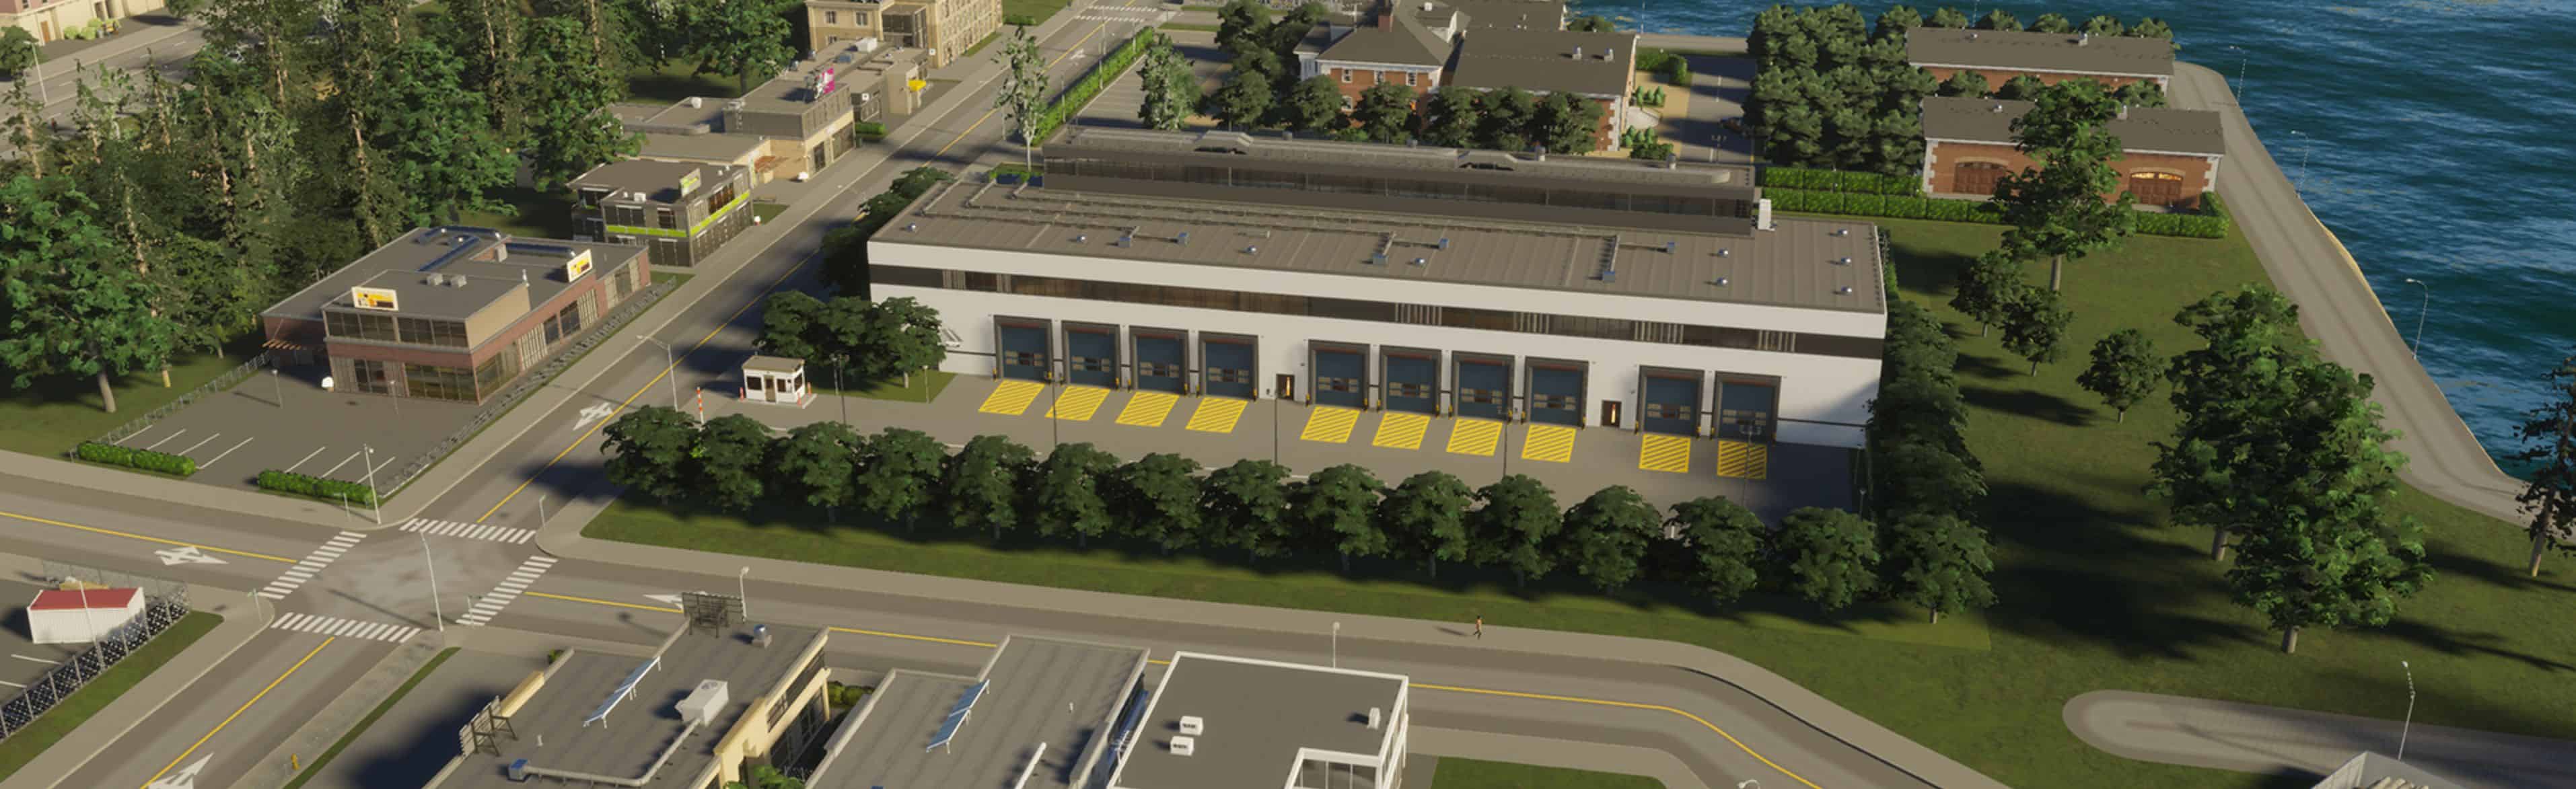 cities skylines how to build airports